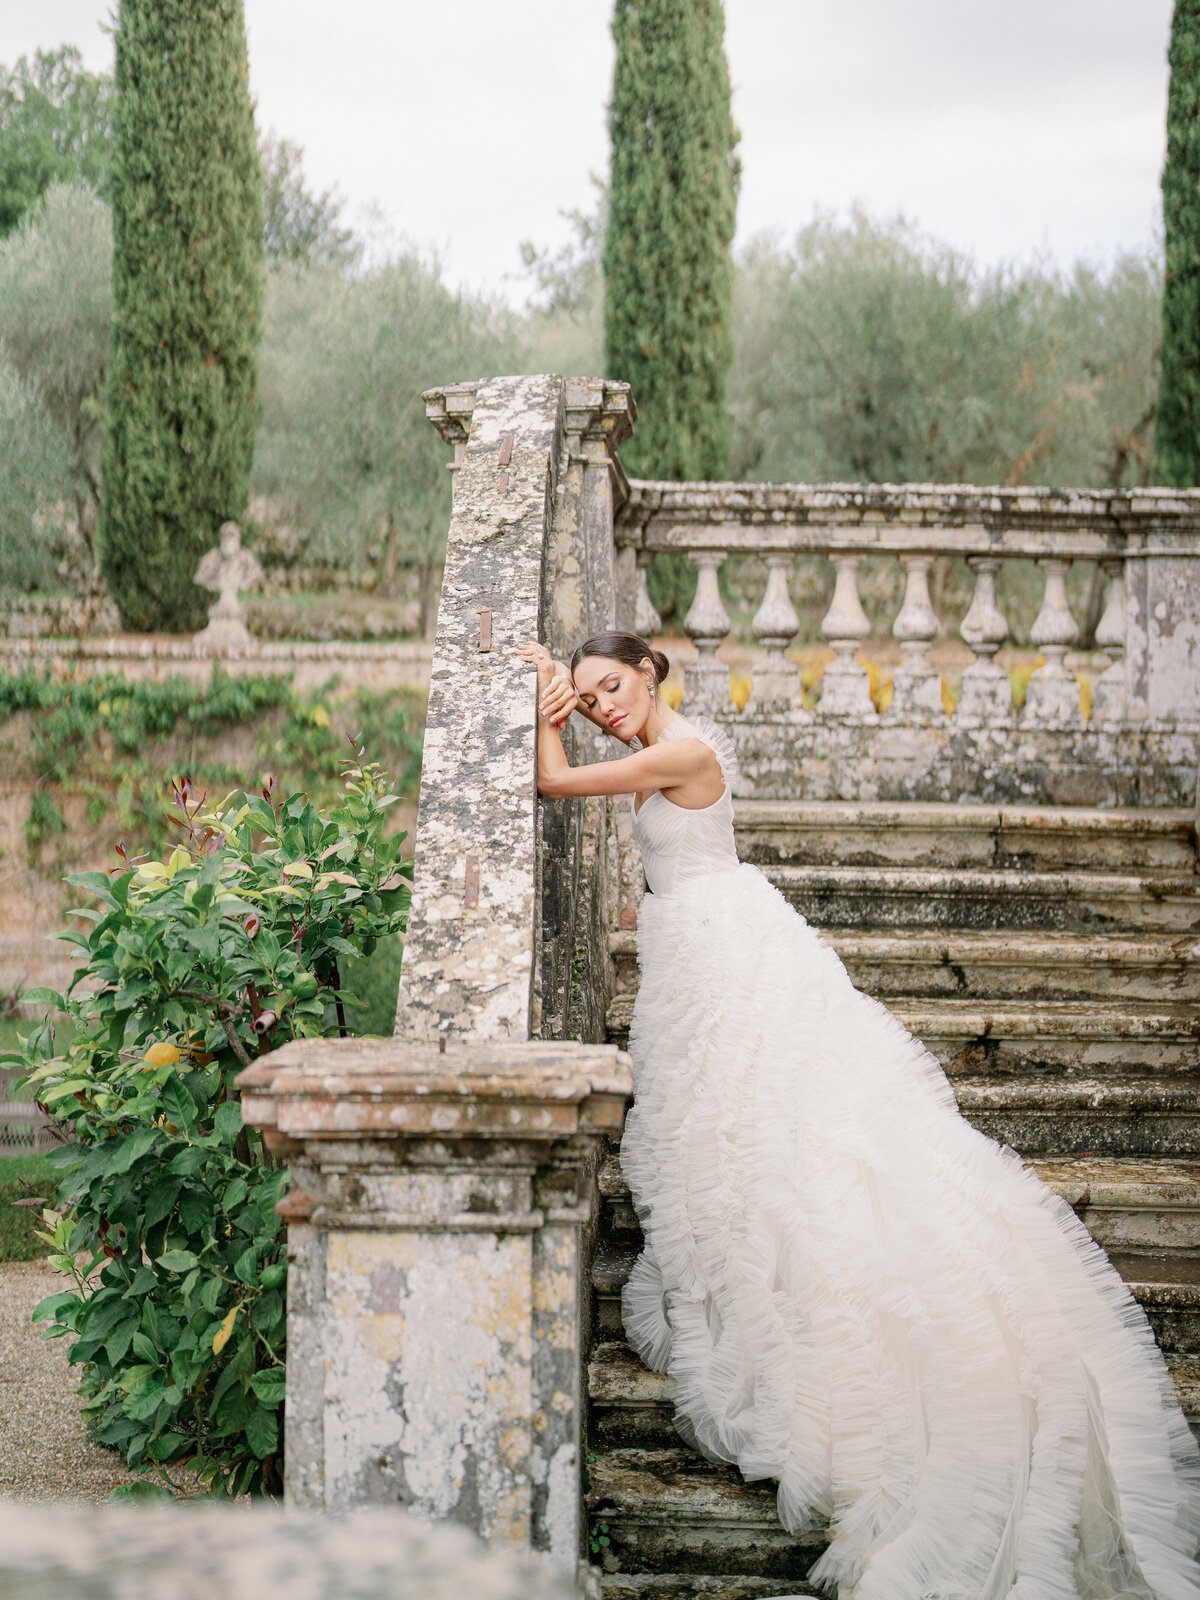 a bride in a fluffy tulle wedding dress leaning up against the stair railing at a villa in tuscany italy